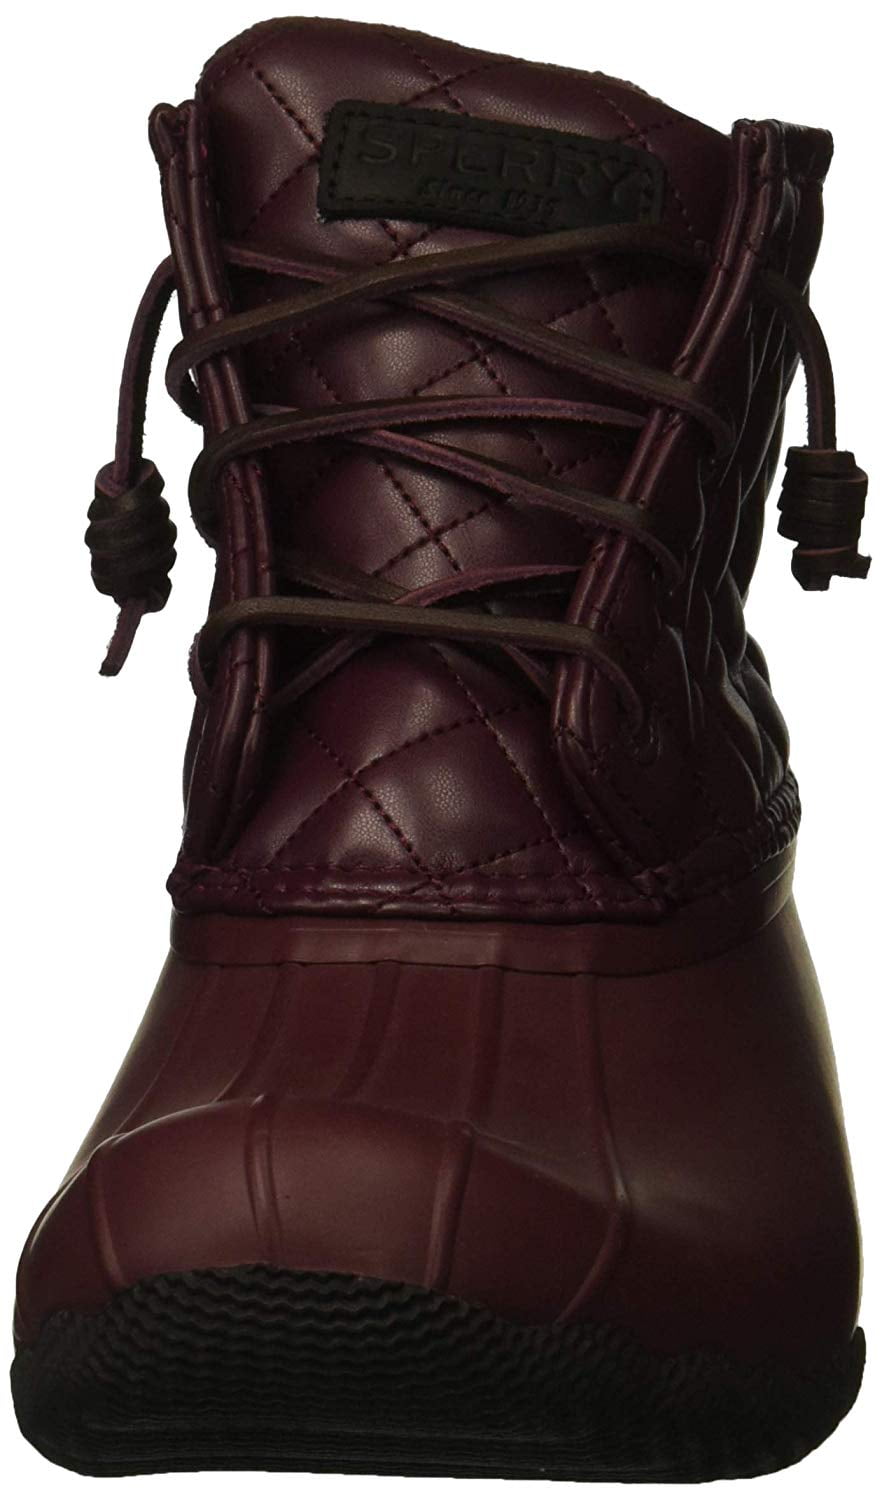 sperry women's saltwater quilted lux rain boot